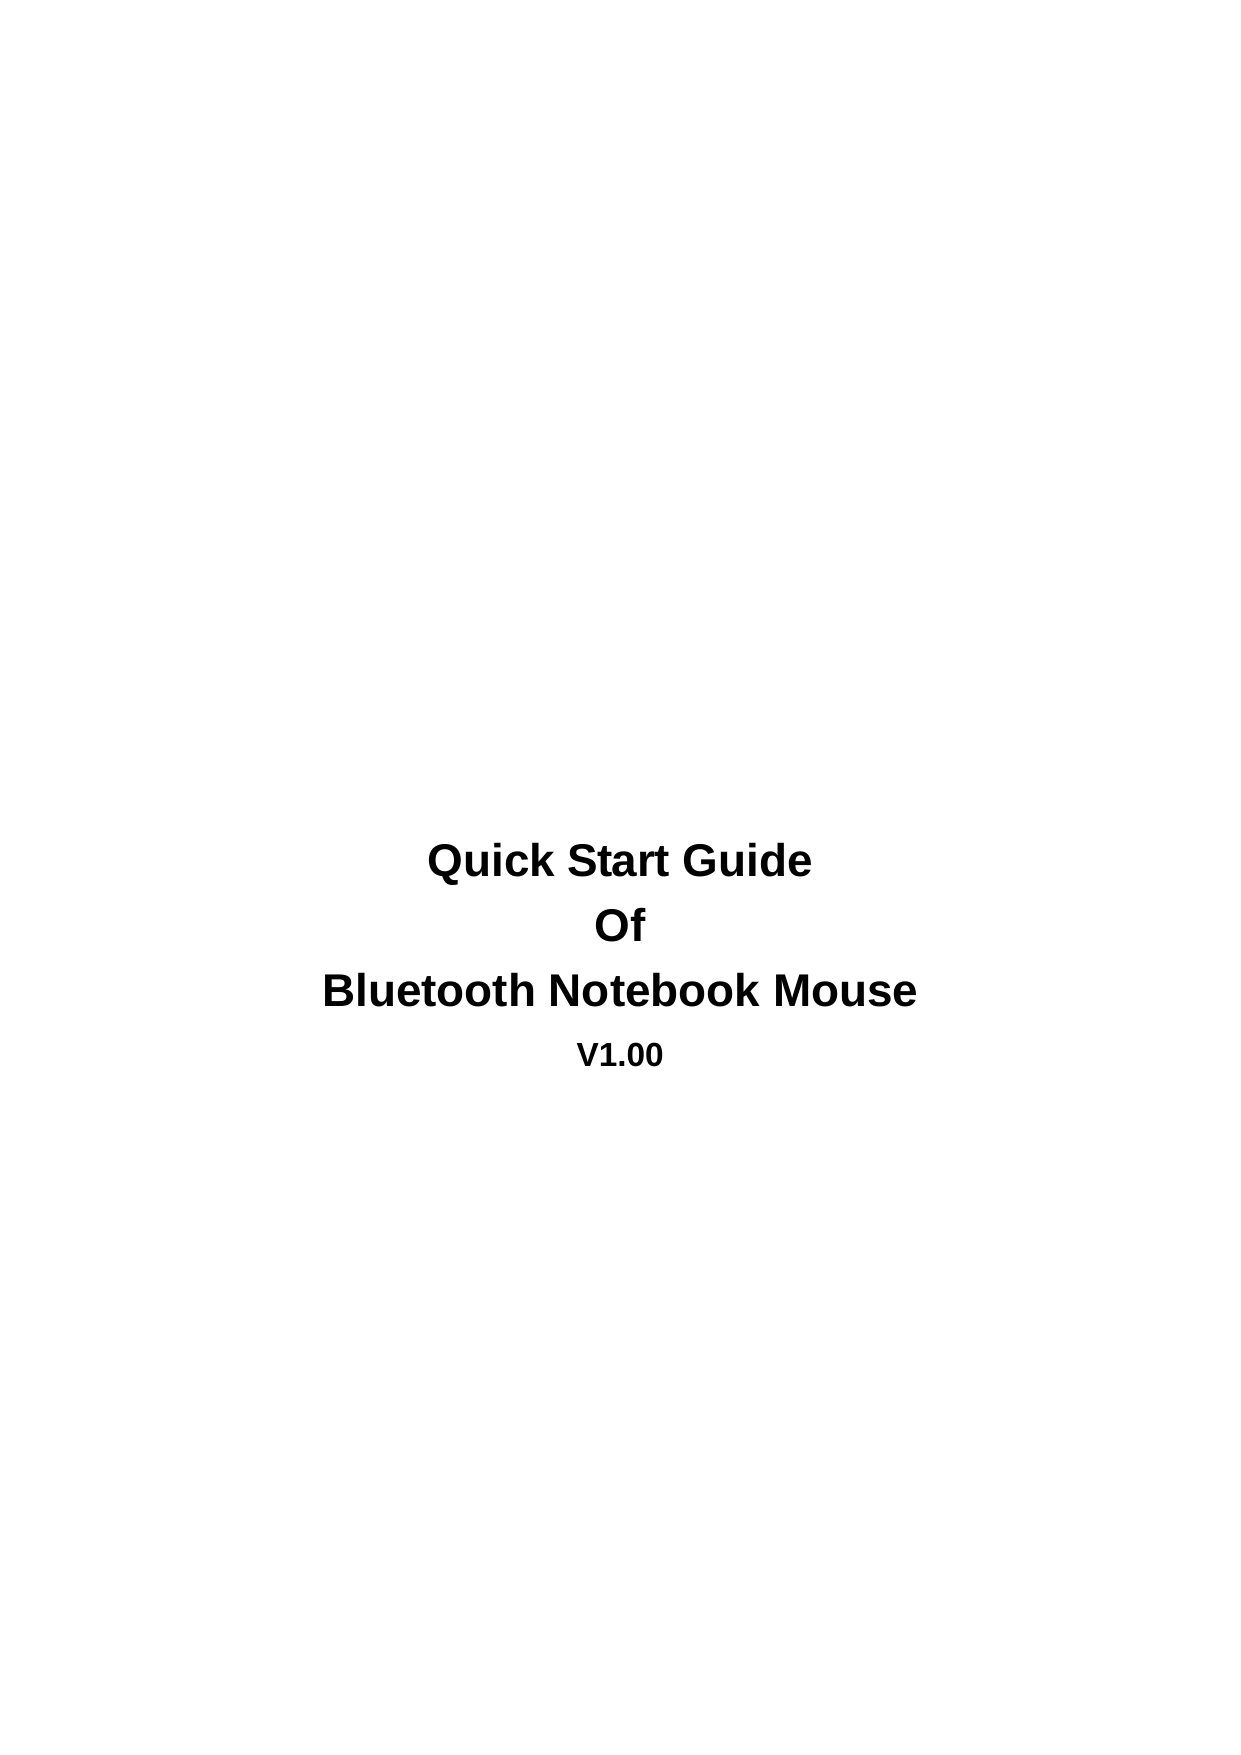           Quick Start Guide Of Bluetooth Notebook Mouse V1.00         